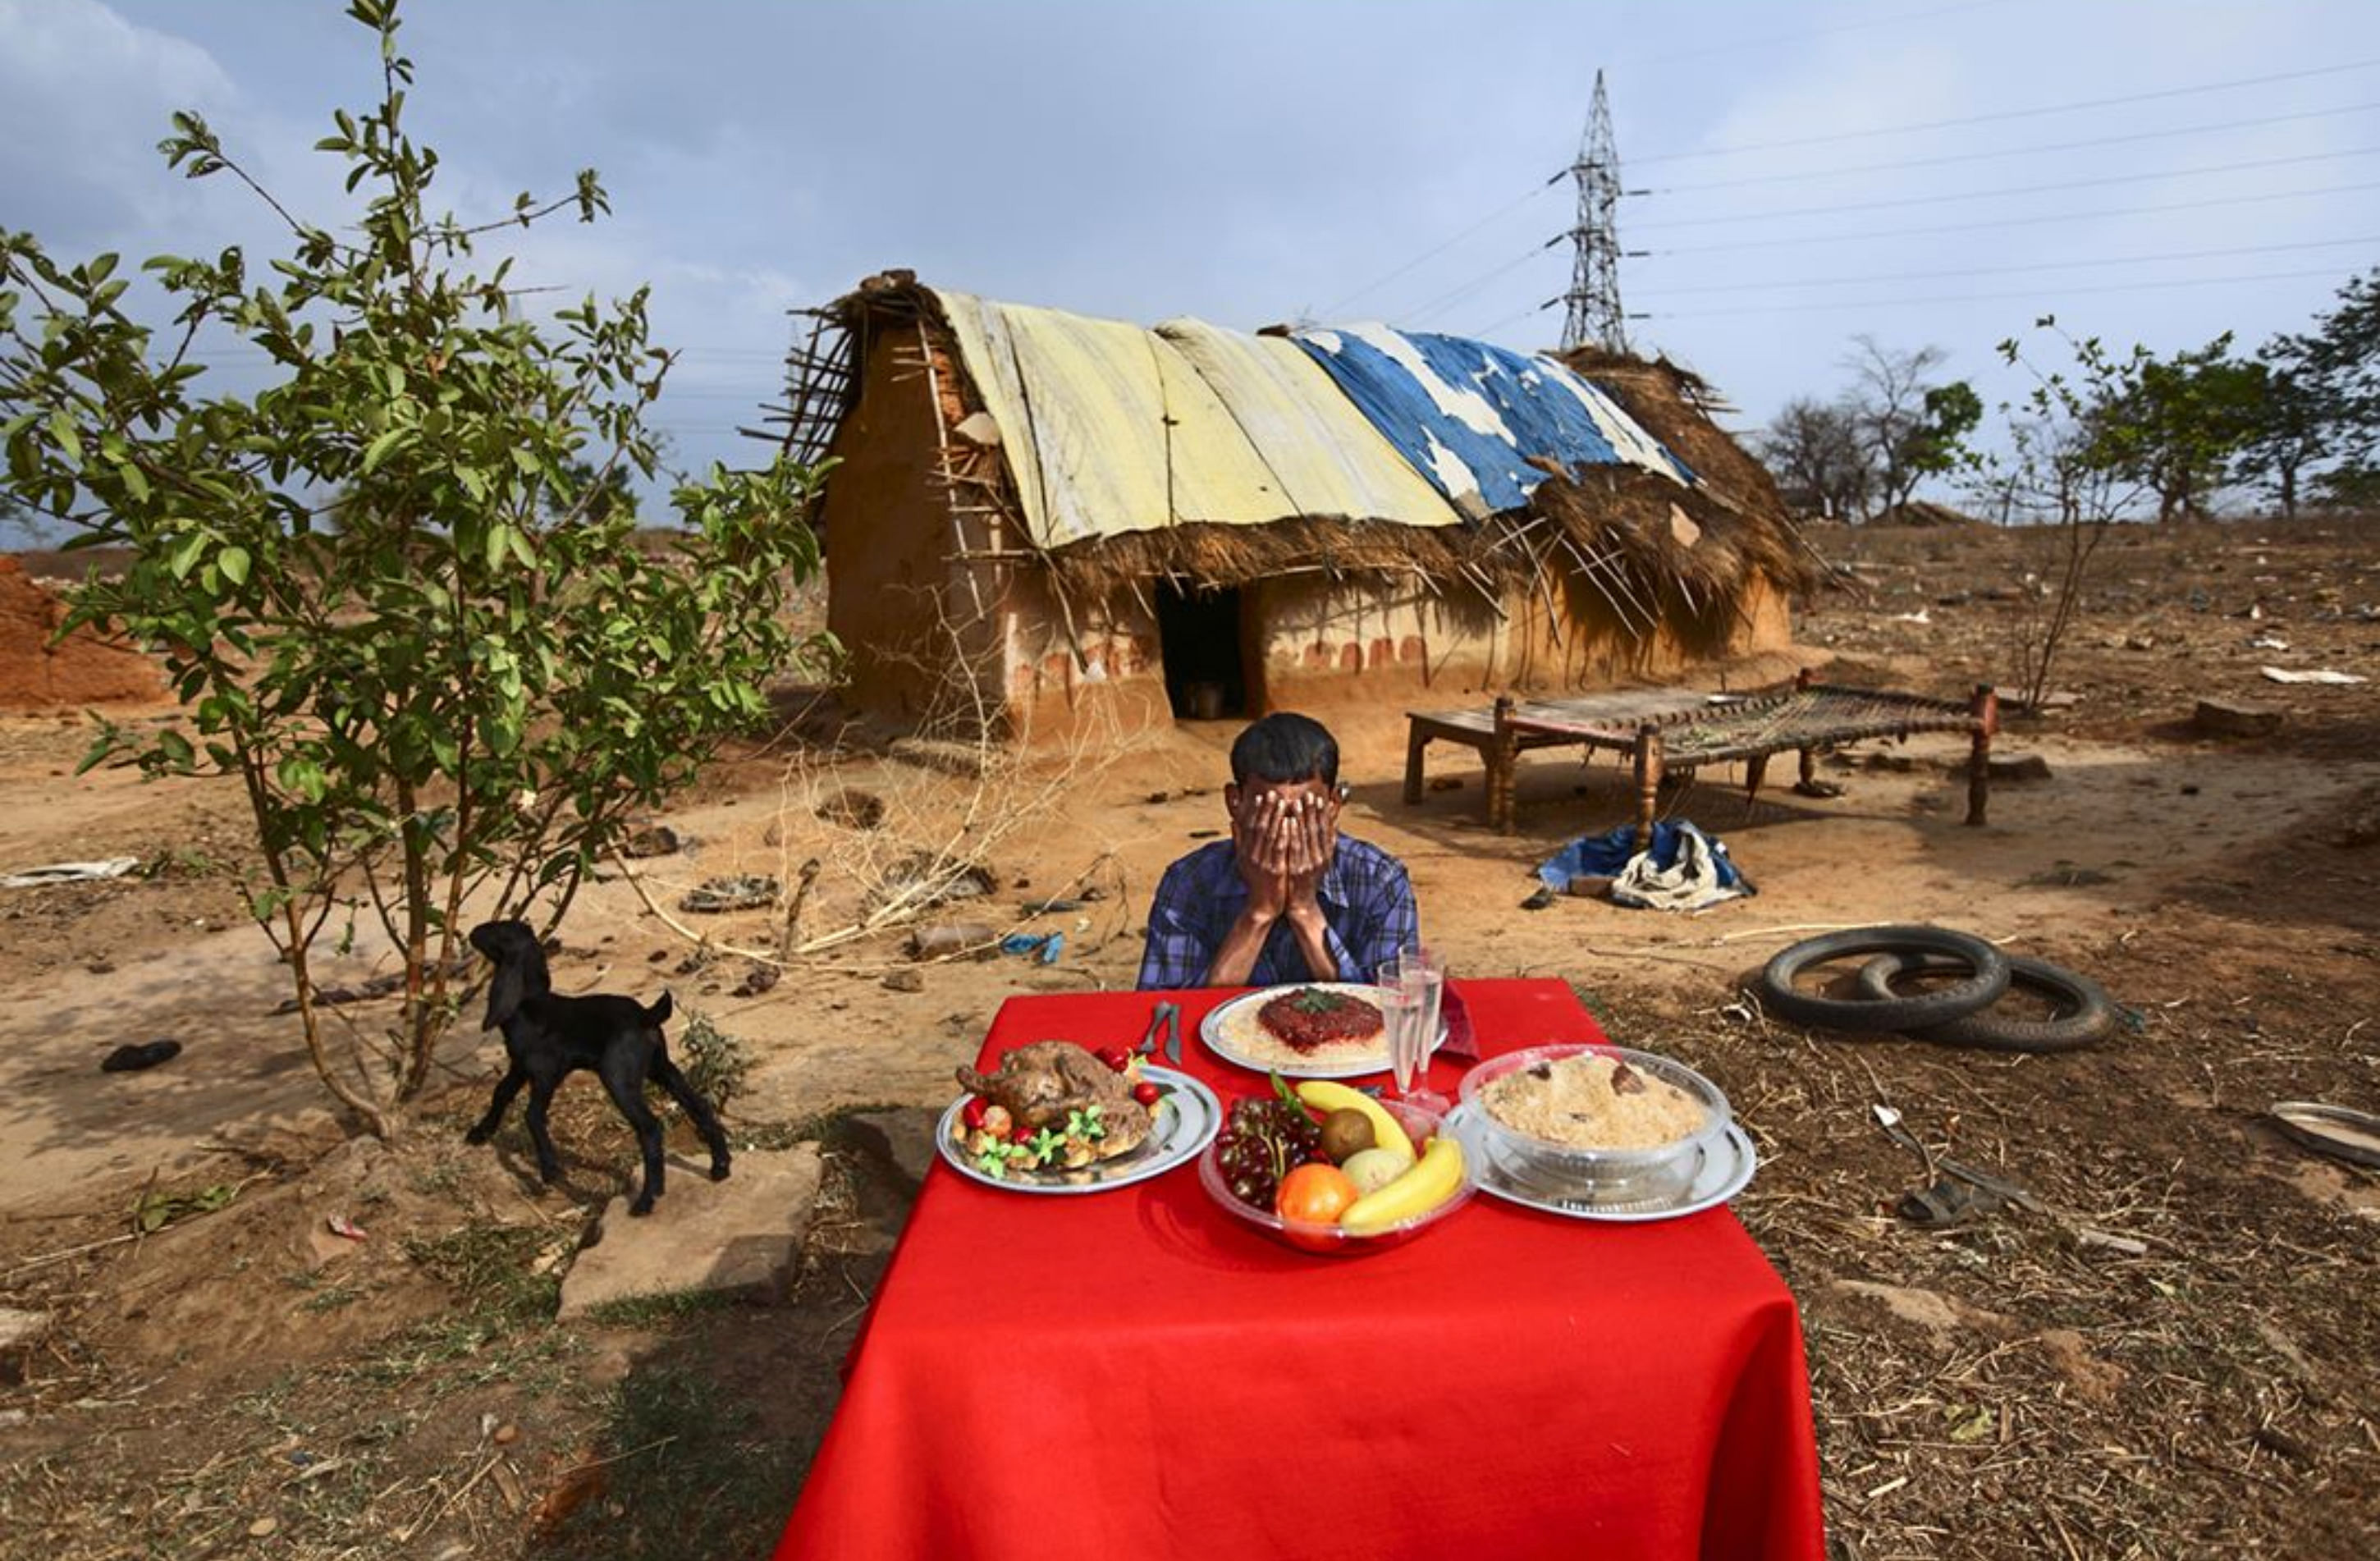 The project was born after reading the statistics of how much food is thrown away in the West | worldpressphoto/ Instagram